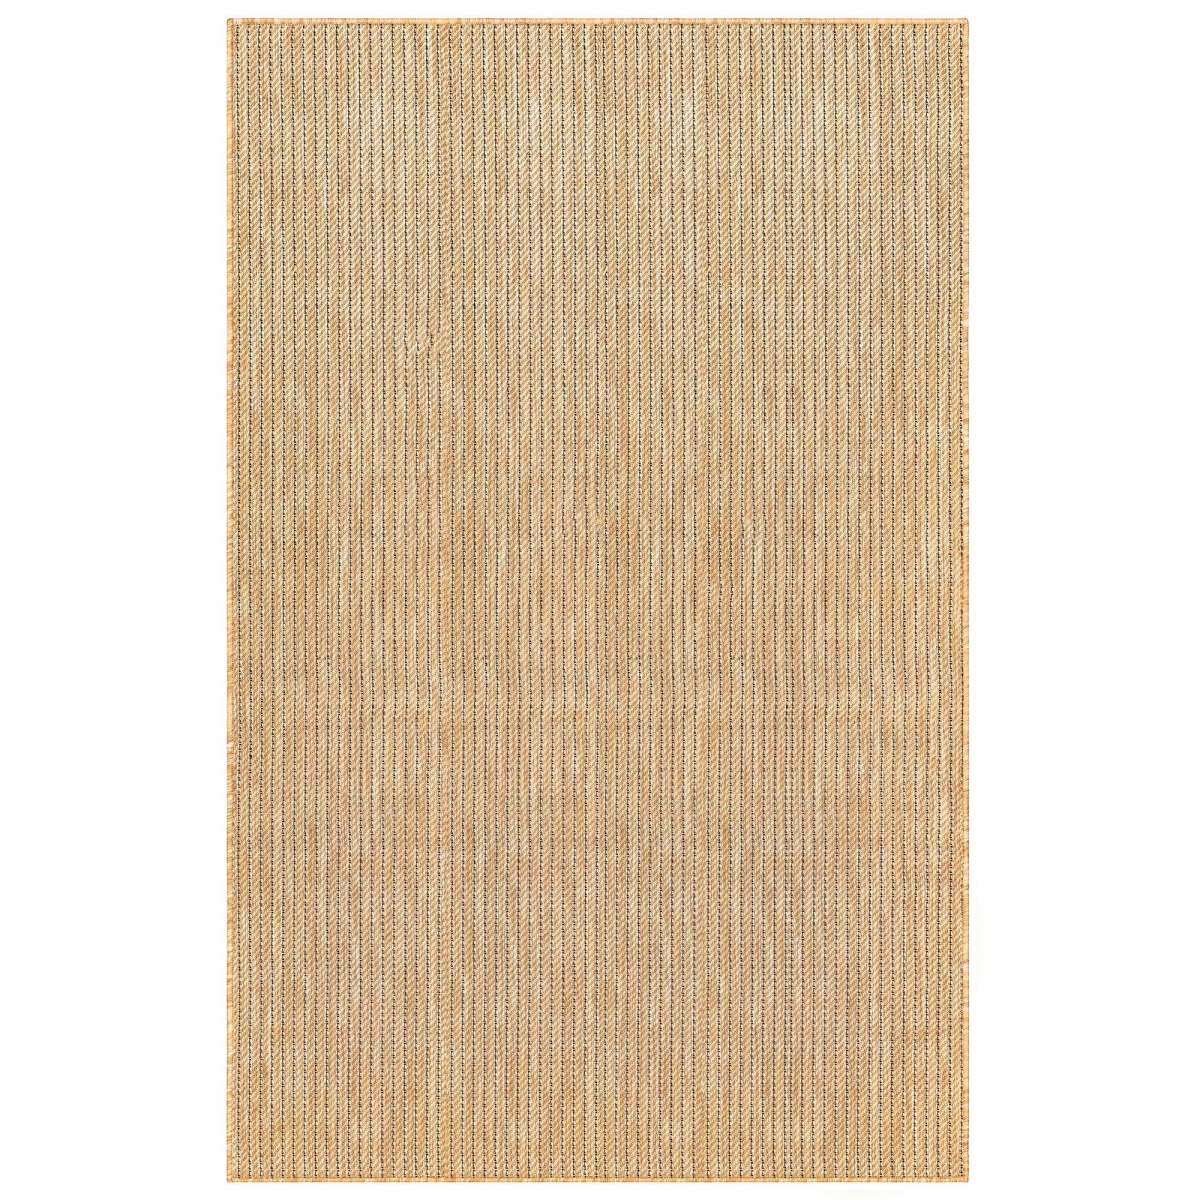 Trans-ocean Imports Cre69842212 6 Ft. 6 In. X 9 Ft. 4 In. Liora Manne Carmel Texture Stripe Indoor & Outdoor Rug Wilton Woven Rectangular Rug - Sand